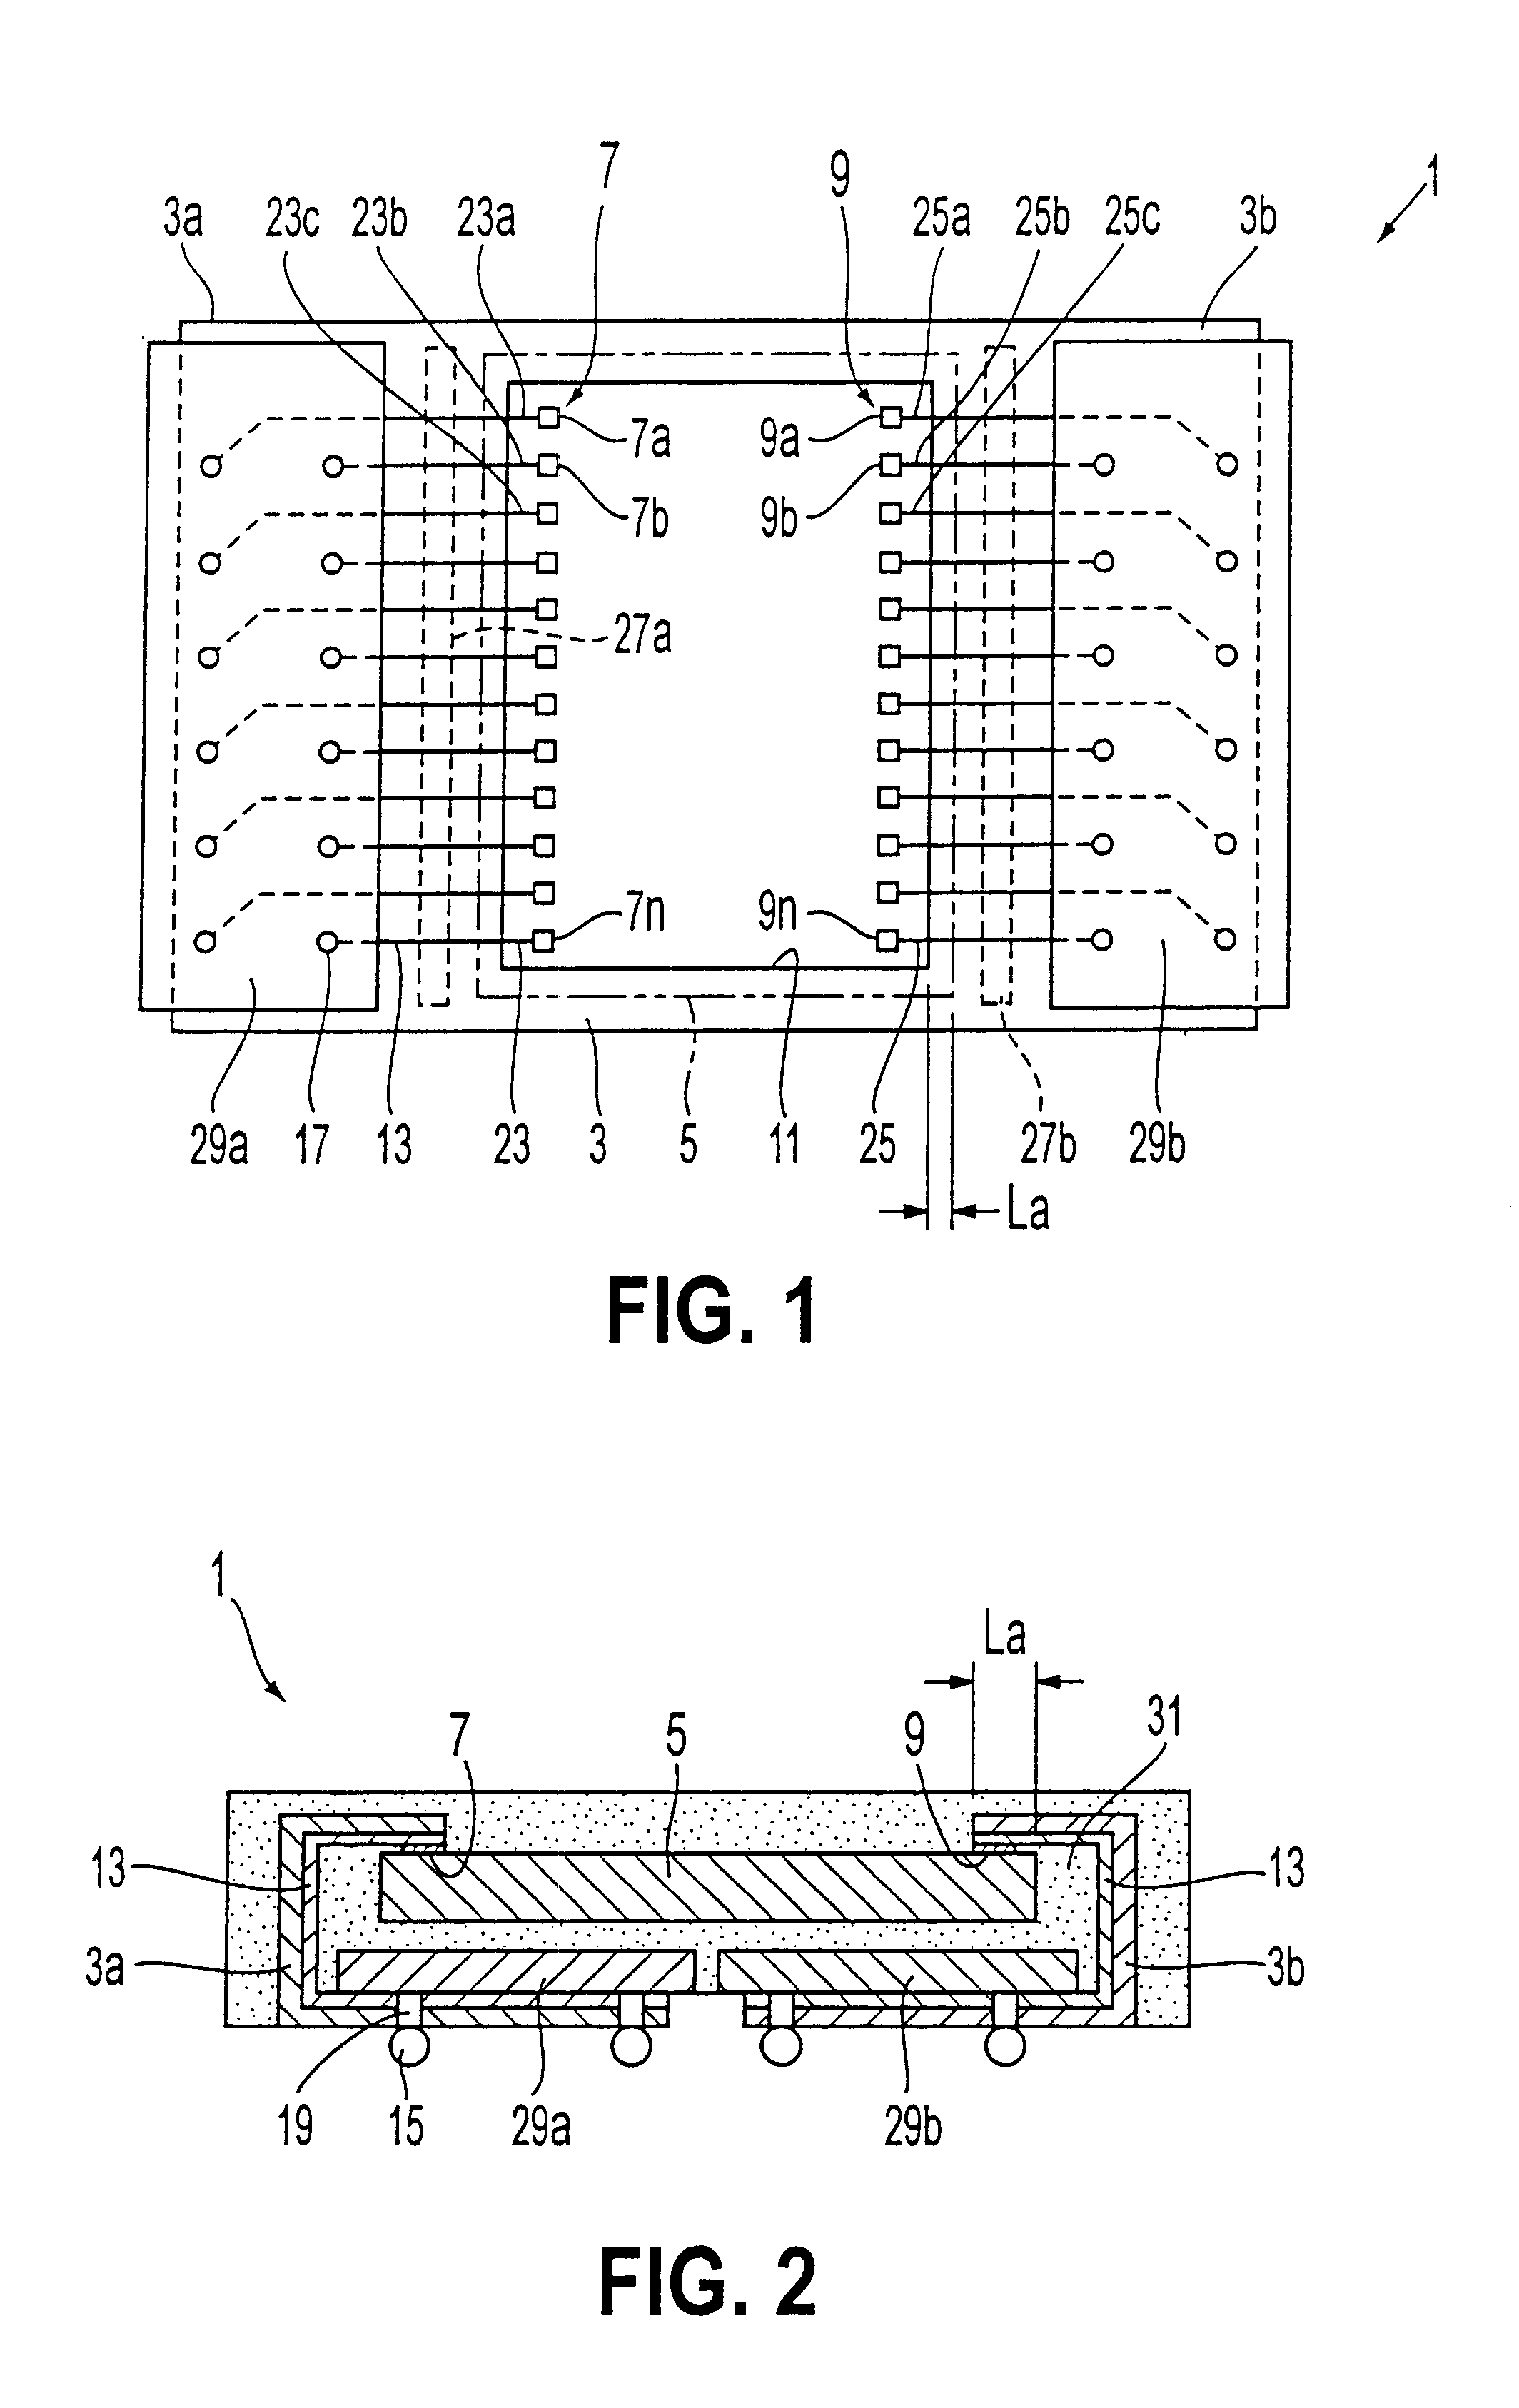 Flexible tape carrier with external terminals formed on interposers